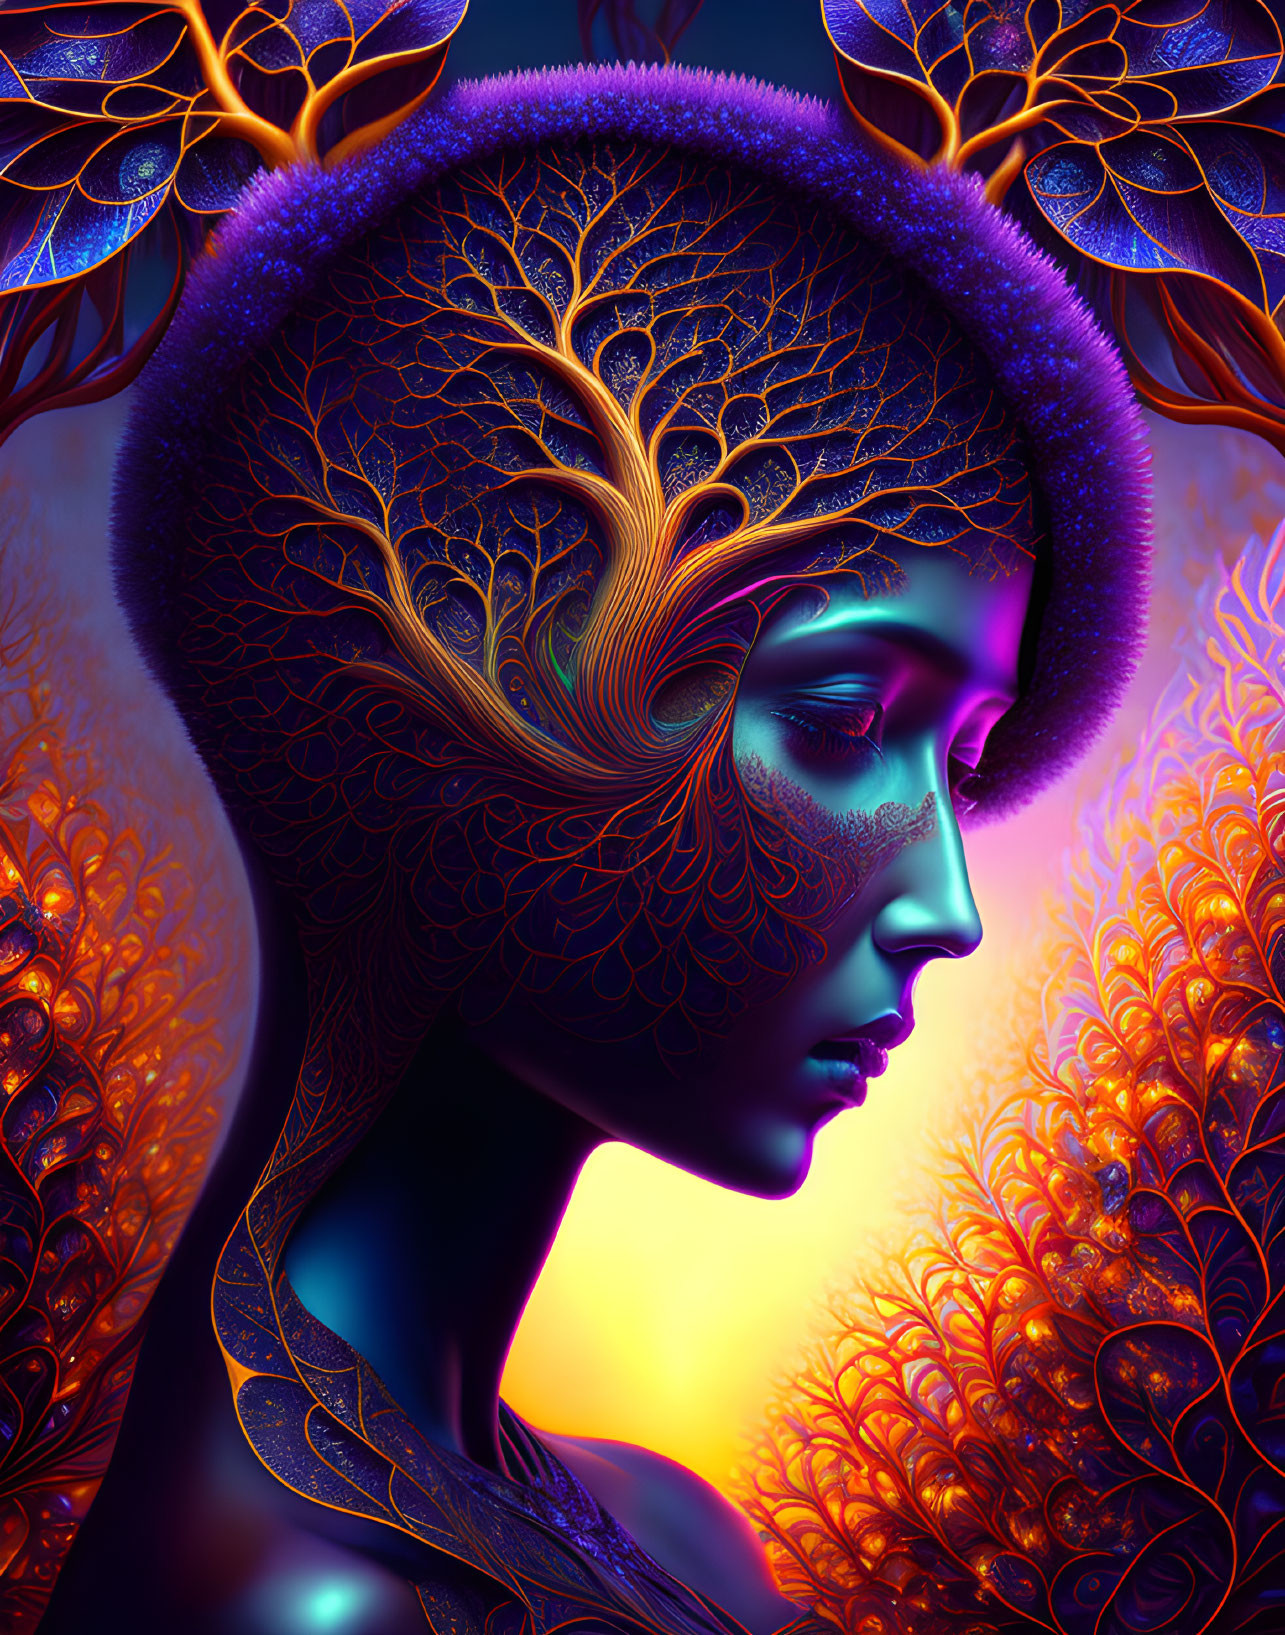 Colorful digital artwork of woman with tree and foliage hair design